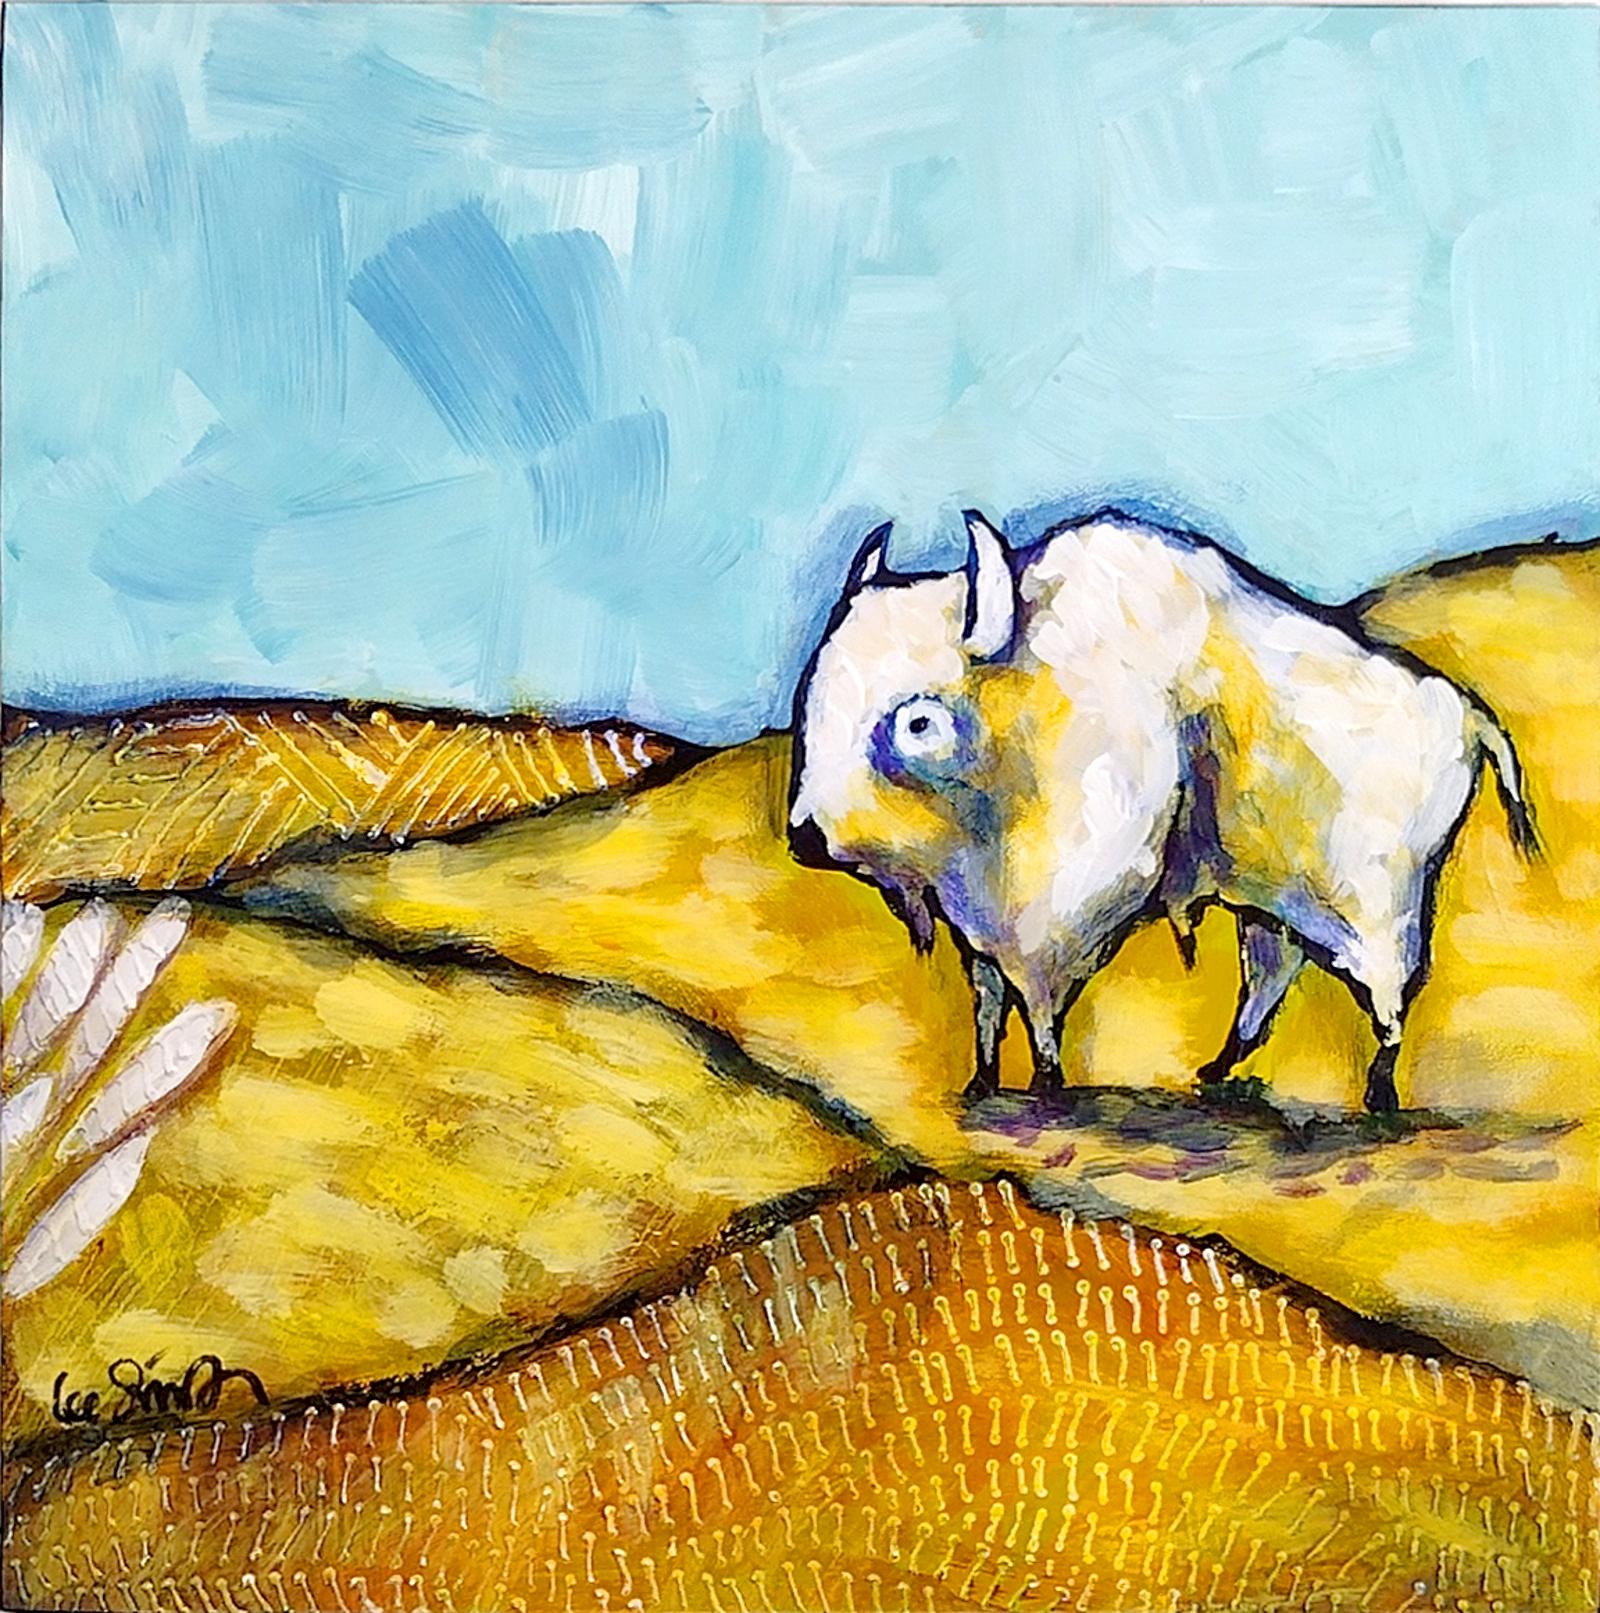 The White Buffalo, Original Painting - Mixed Media Art by Lee Smith